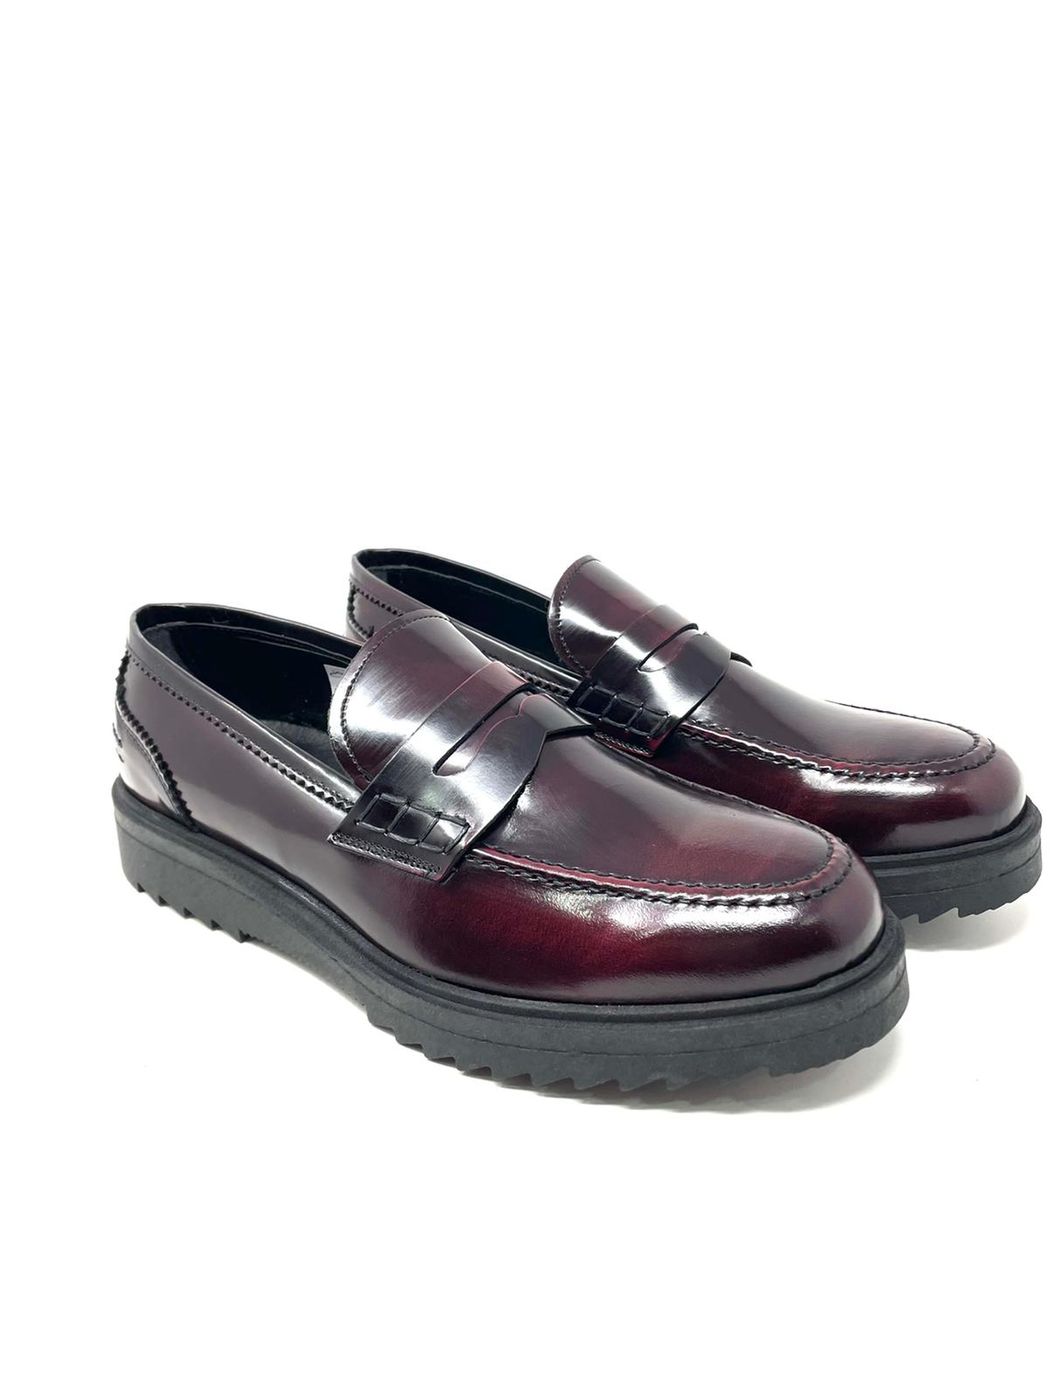 Patent moccasin with toothed rubber sole, real leather, made in Italy 